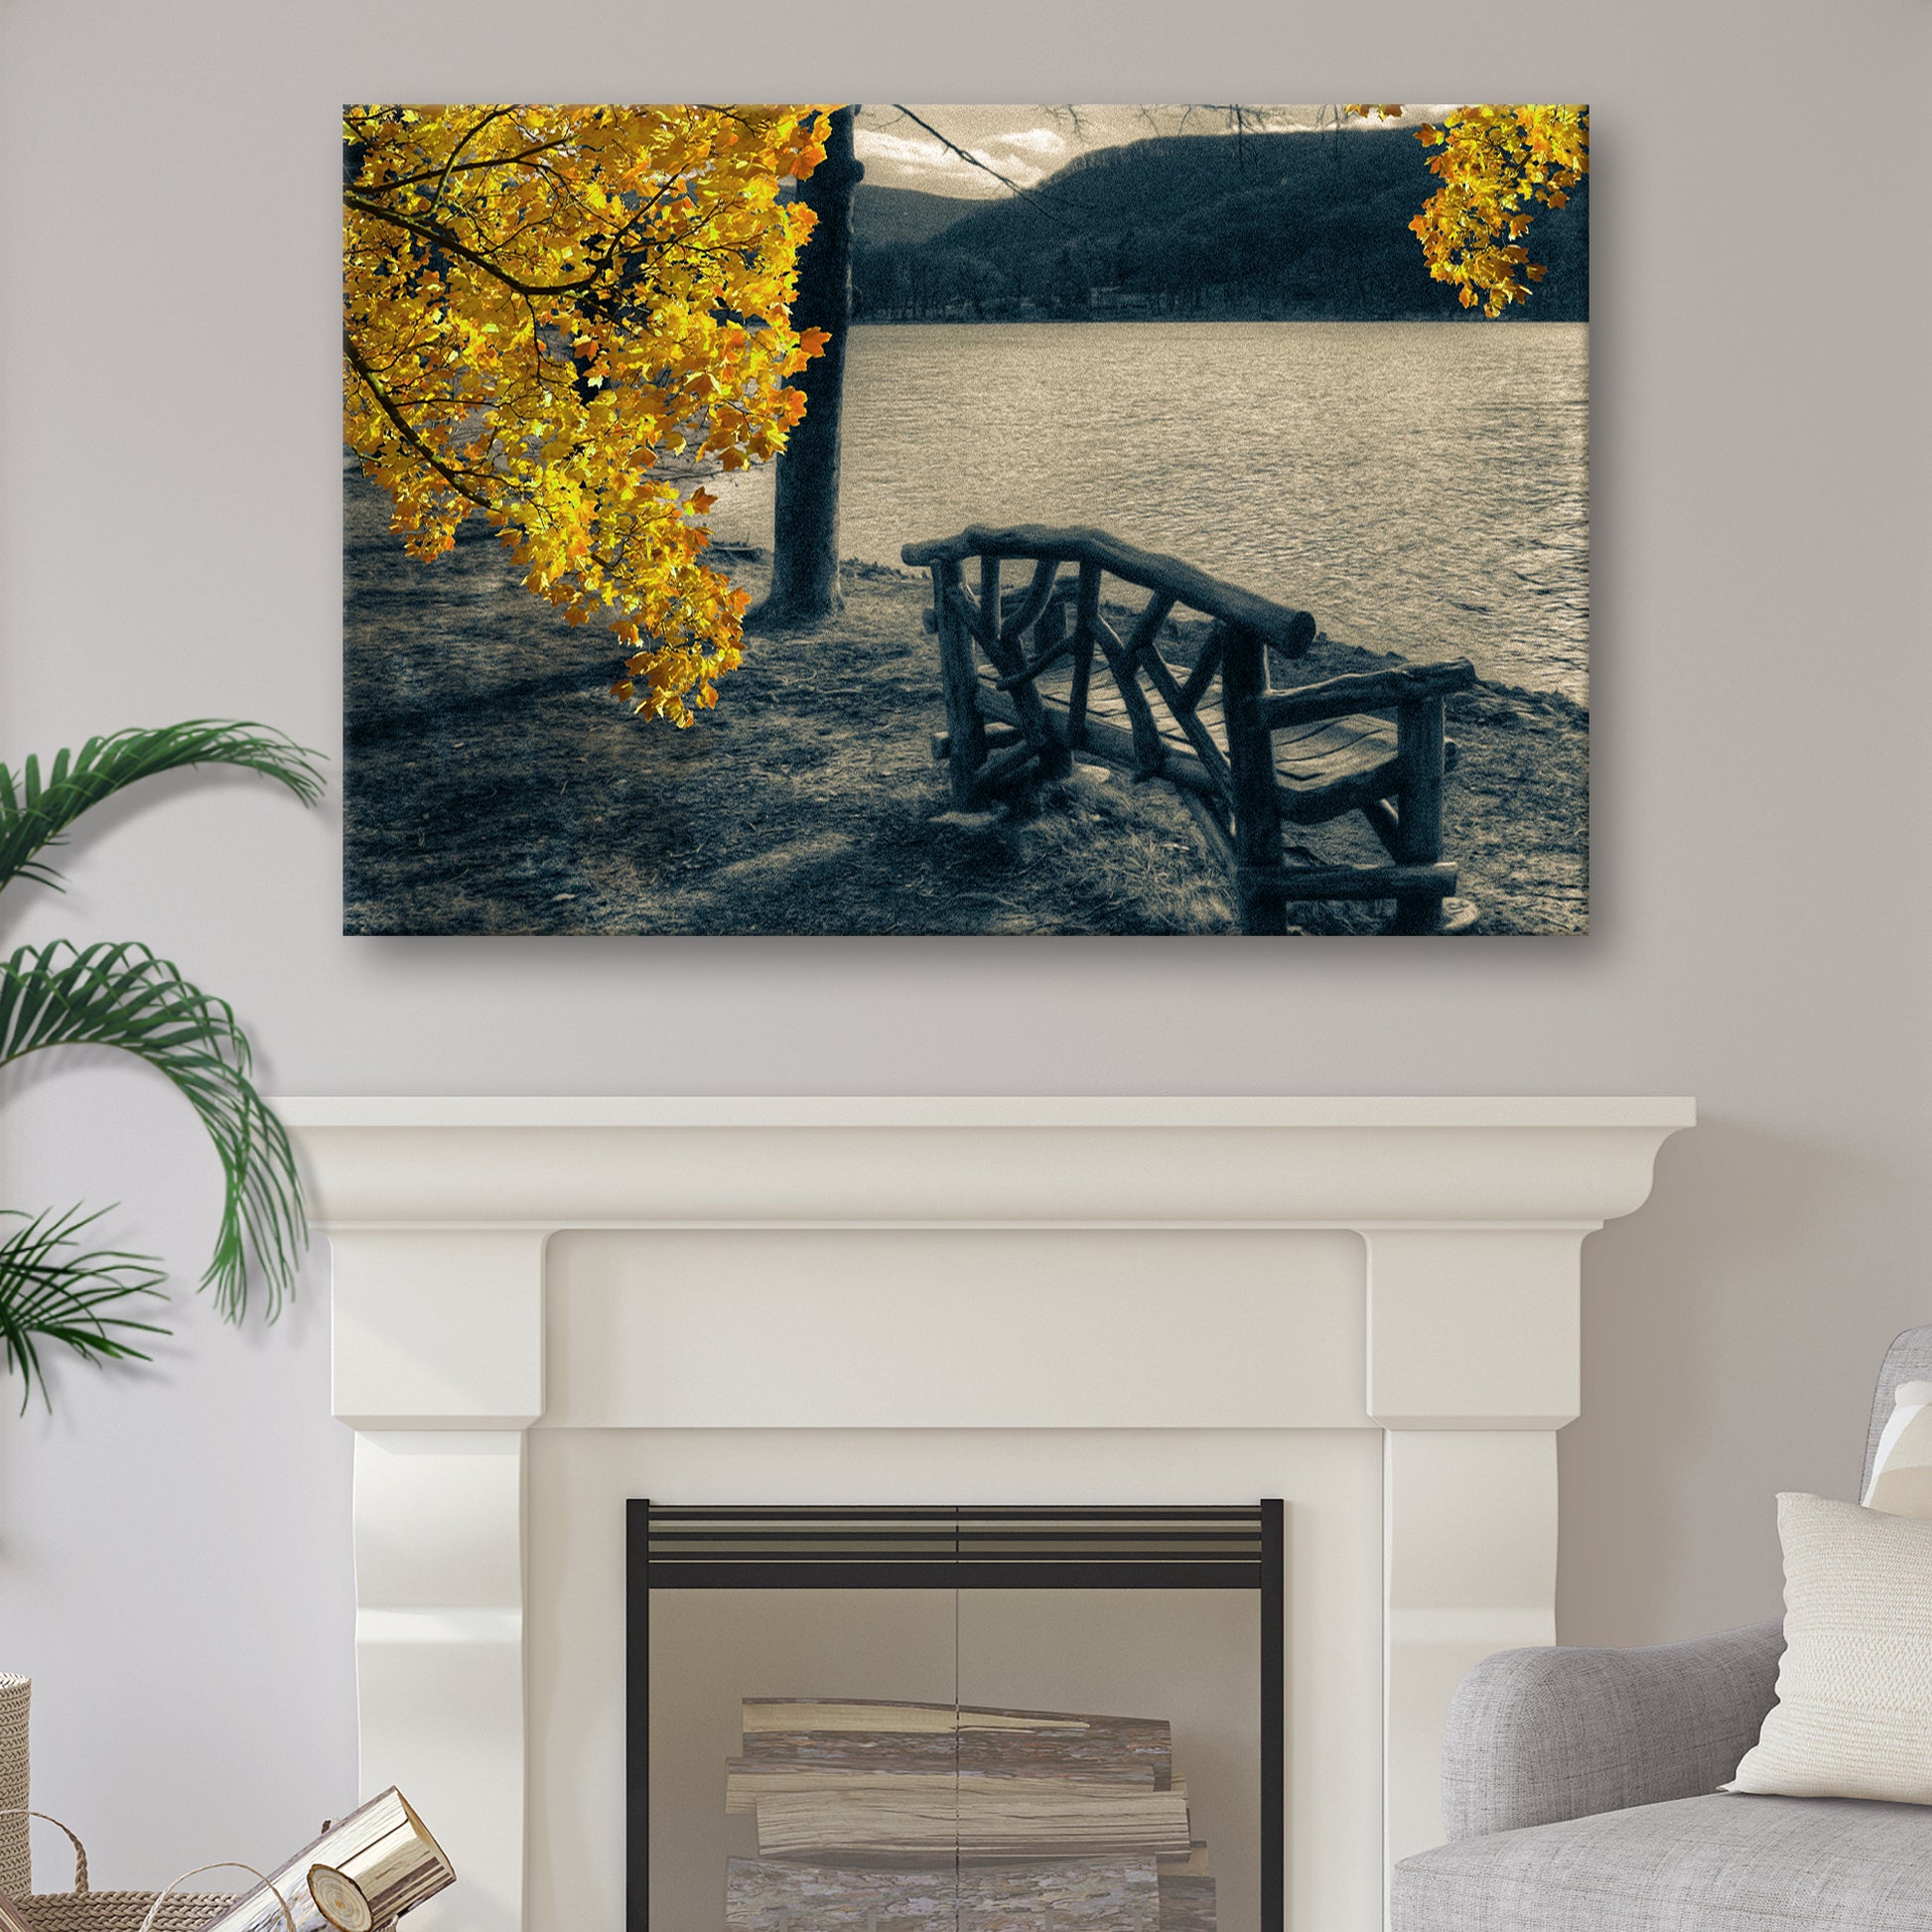 Lake Side Yellow Maple Tree Canvas Wall Art - Image by Tailored Canvases